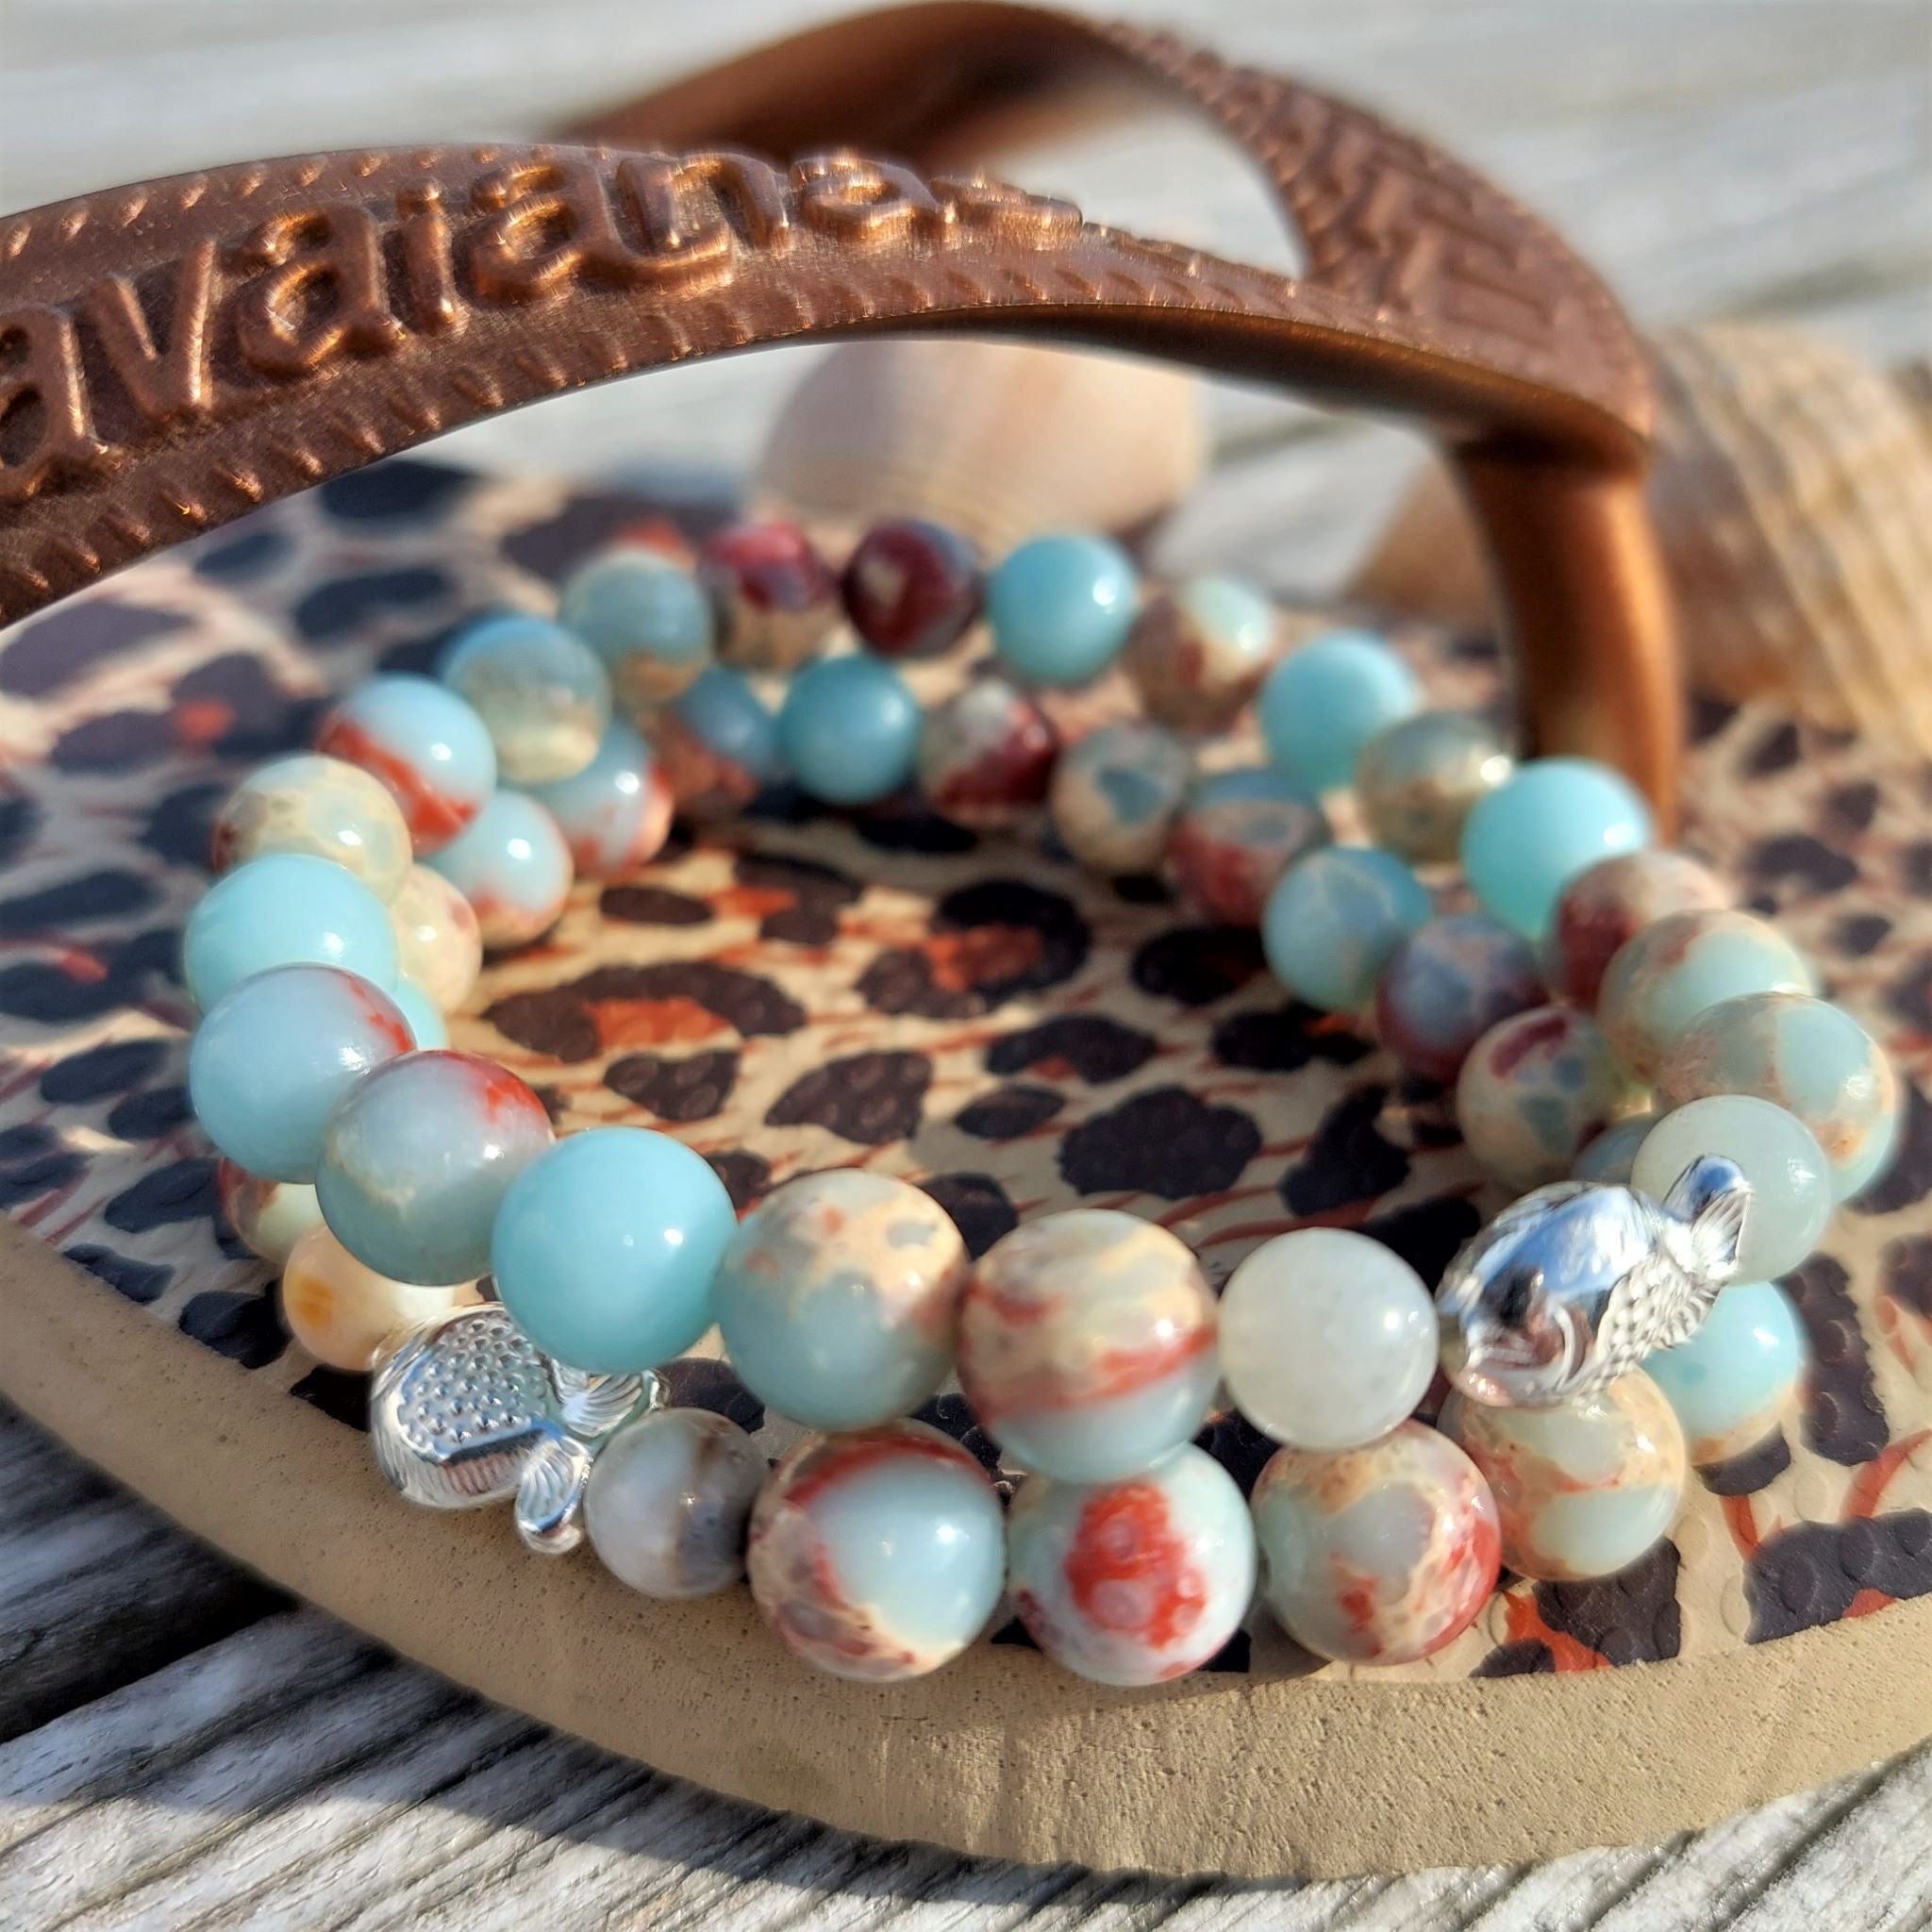 Gorgeous natural stone bead bracelet in shades of pale blue, cream & brown with super cute sterling silver fish  Elasticated, so will fit most adult wrists (measuring 71/2 in/19cm)  Add a cool beach vibe look to your outfit with these natural stone bracelets  **Presented in lovely Kraft paper gift box with reusable organza pouch**